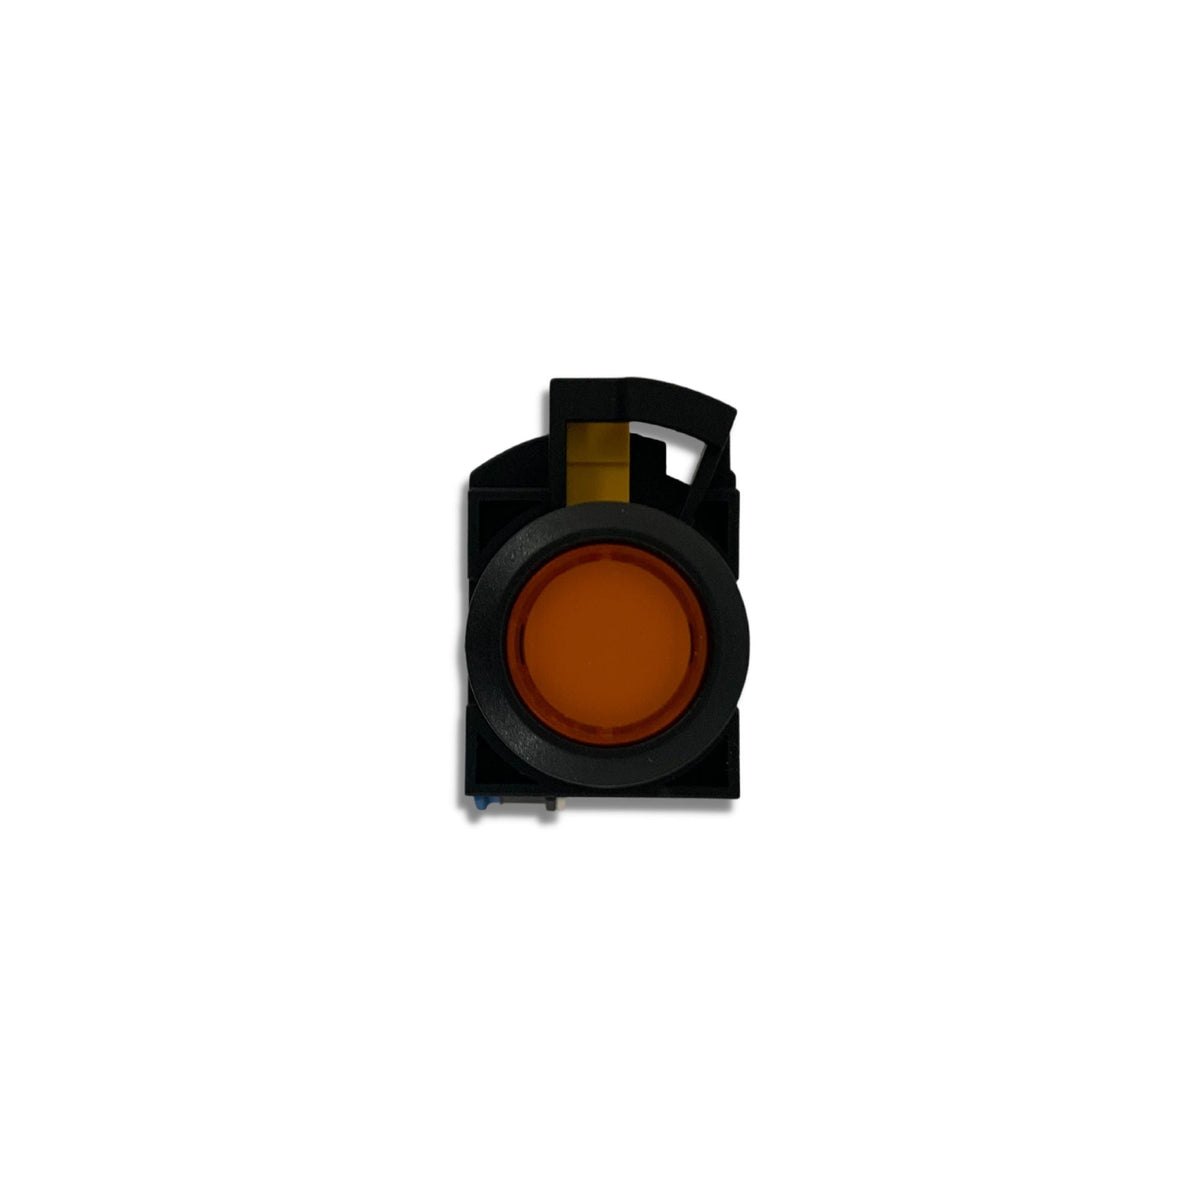 front view of a pushbutton unit with black housing and an amber colored button in the front